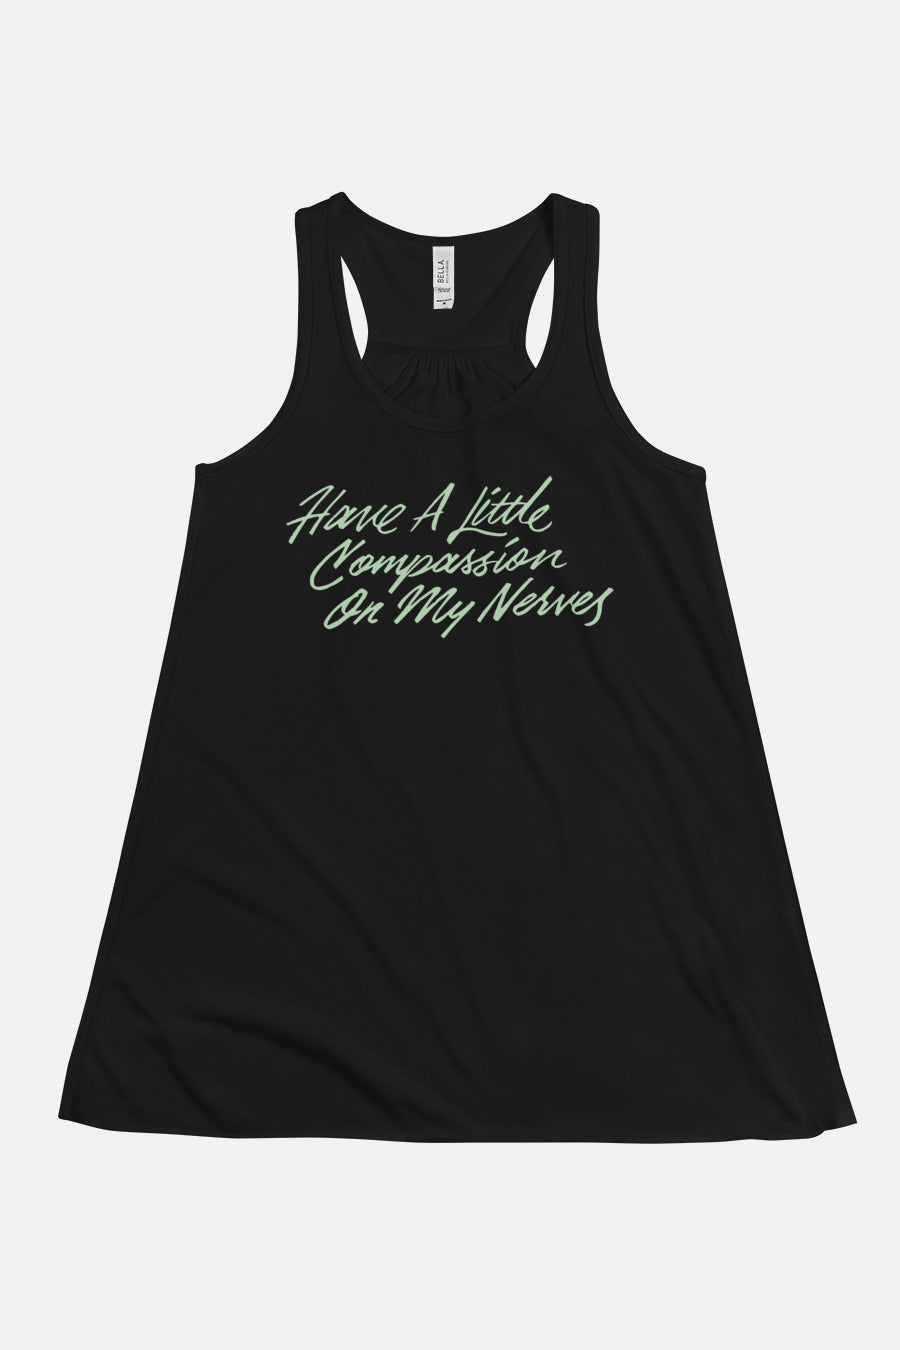 My Nerves! Fitted Flowy Racerback Tank | Pride and Prejudice